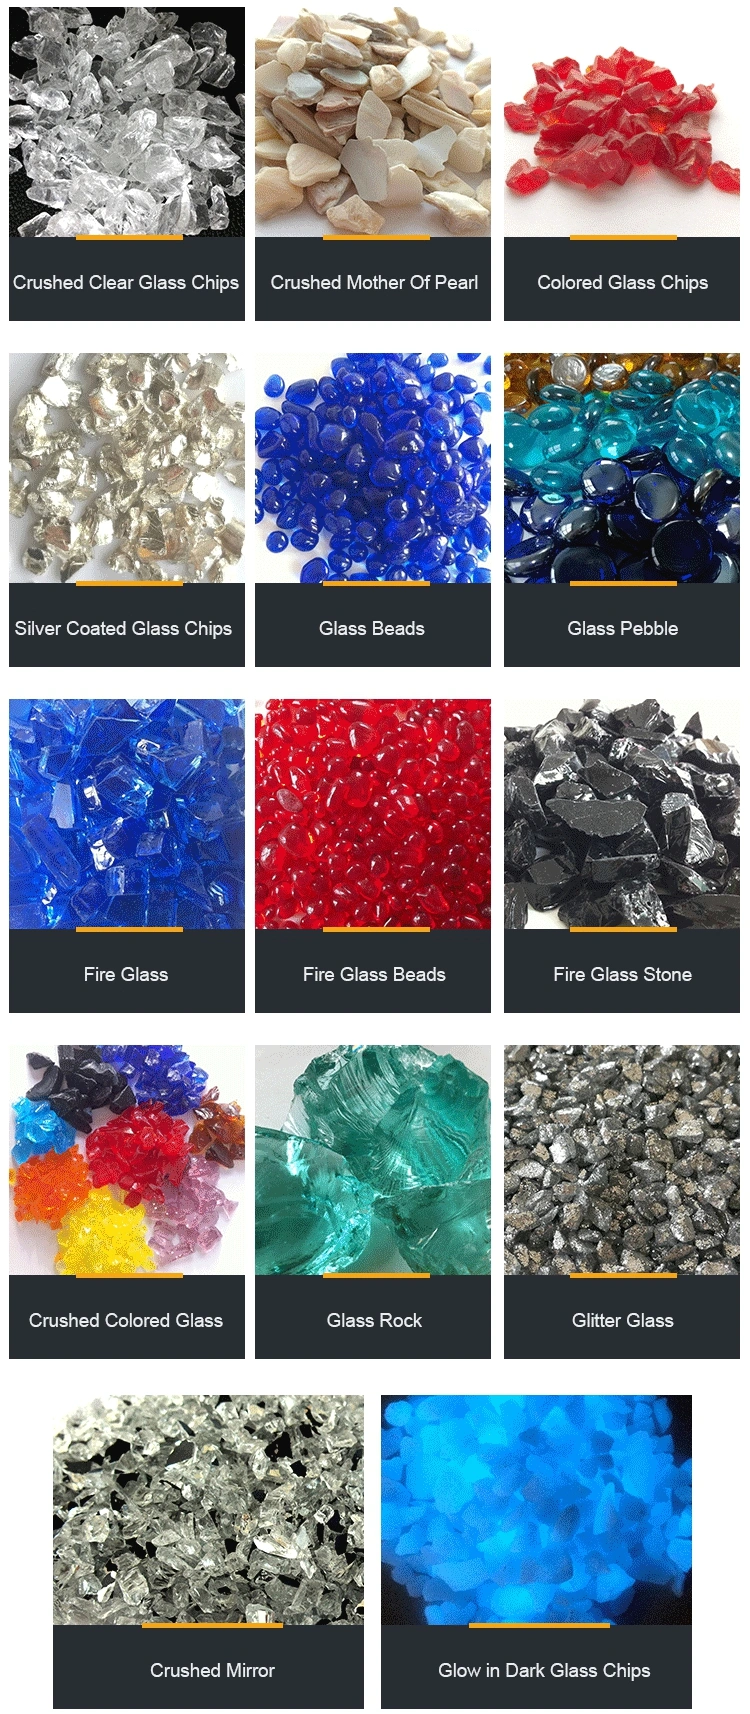 Crushed Broken Colored Glass /Recycled Glass Chippings for Crafts